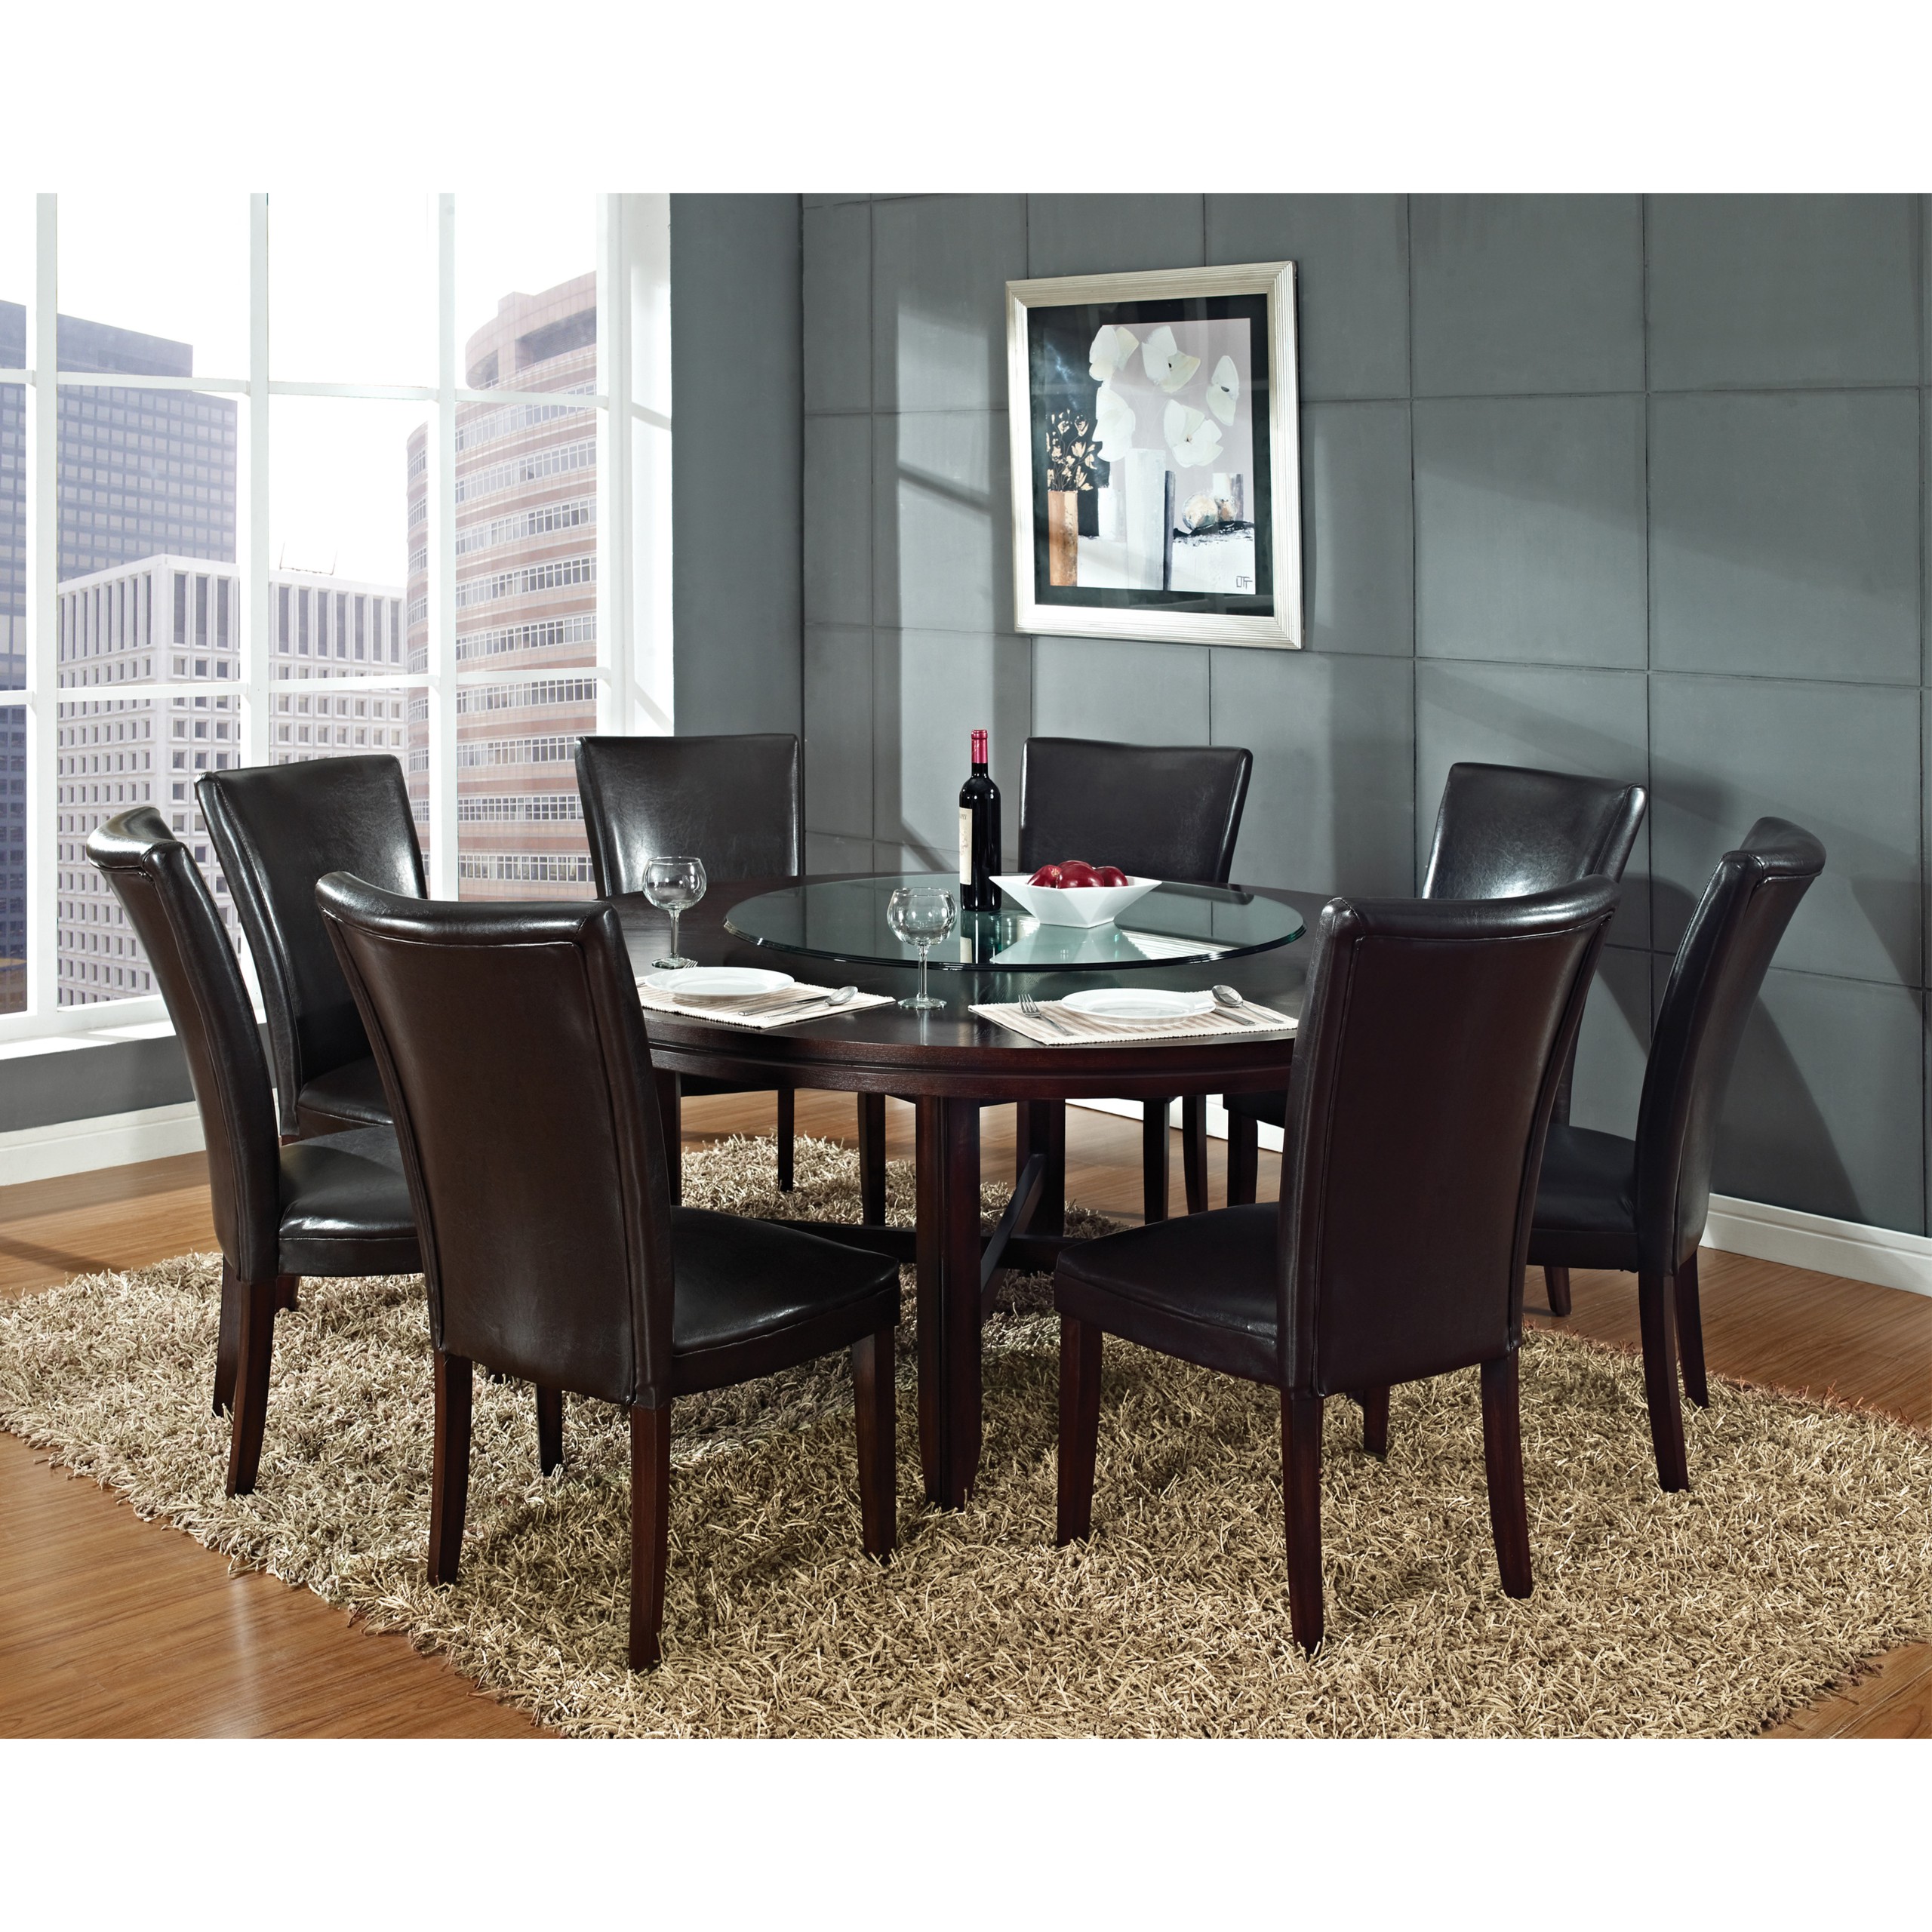 Eight seater square dining table